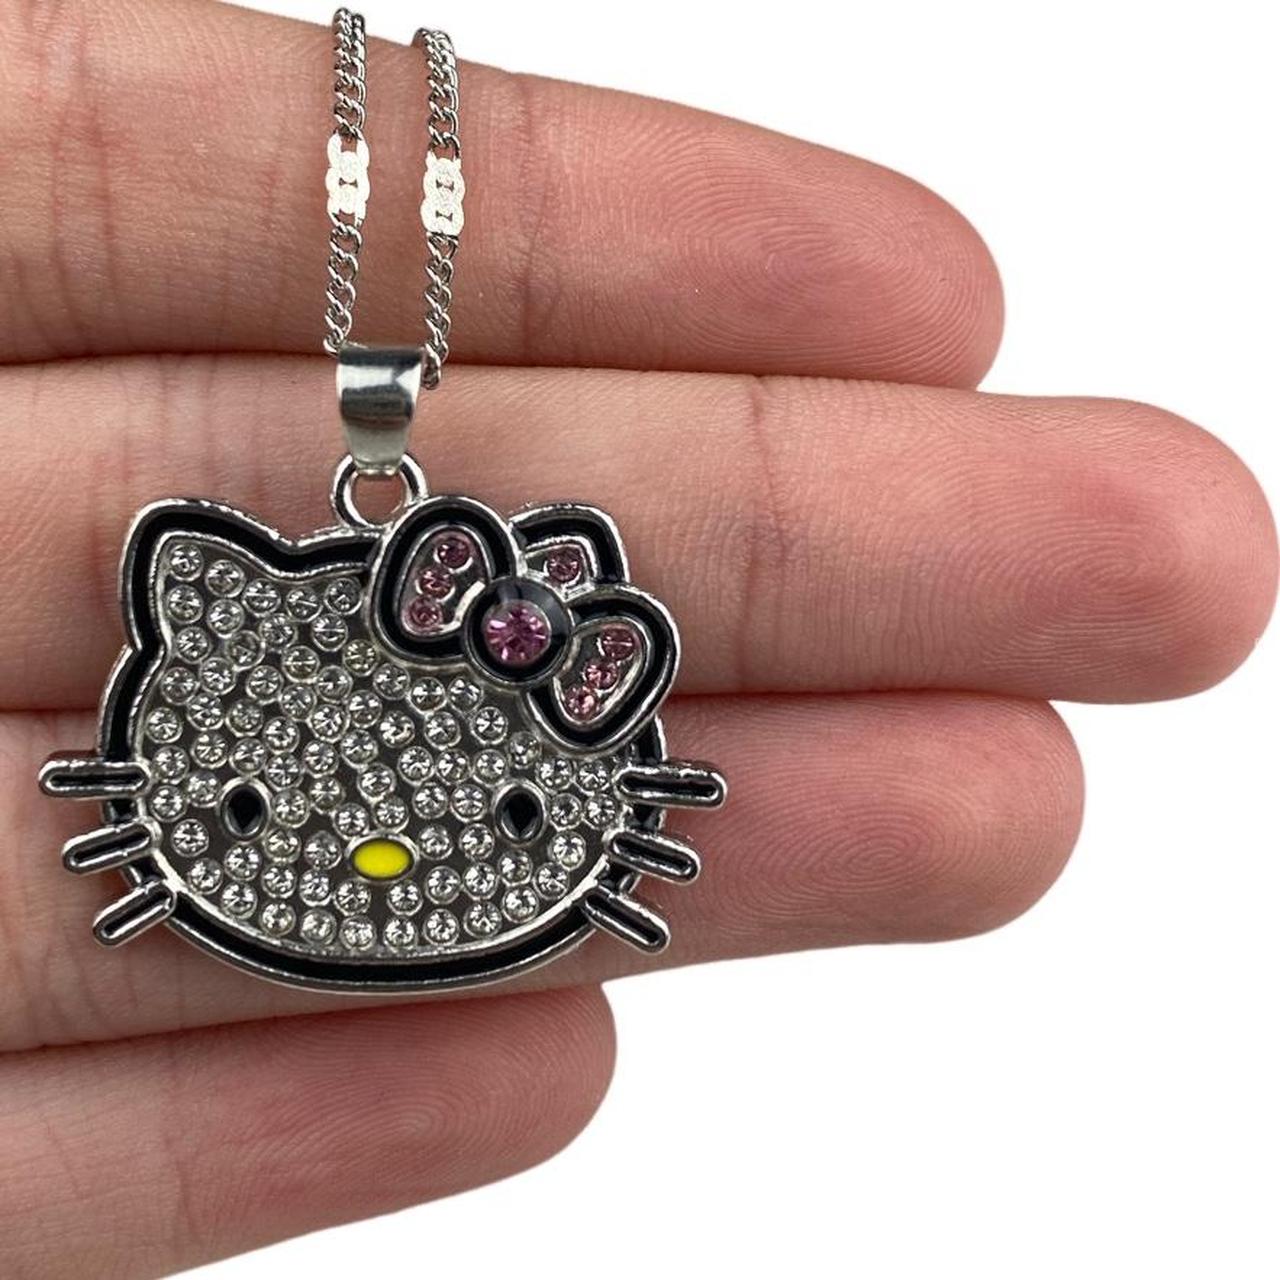 Buy El Regalo Rhinestone Hello Kitty Jewelry Set for Girls | Hello Kitty  Ring, Earrings and Necklace Set for Girls at Amazon.in